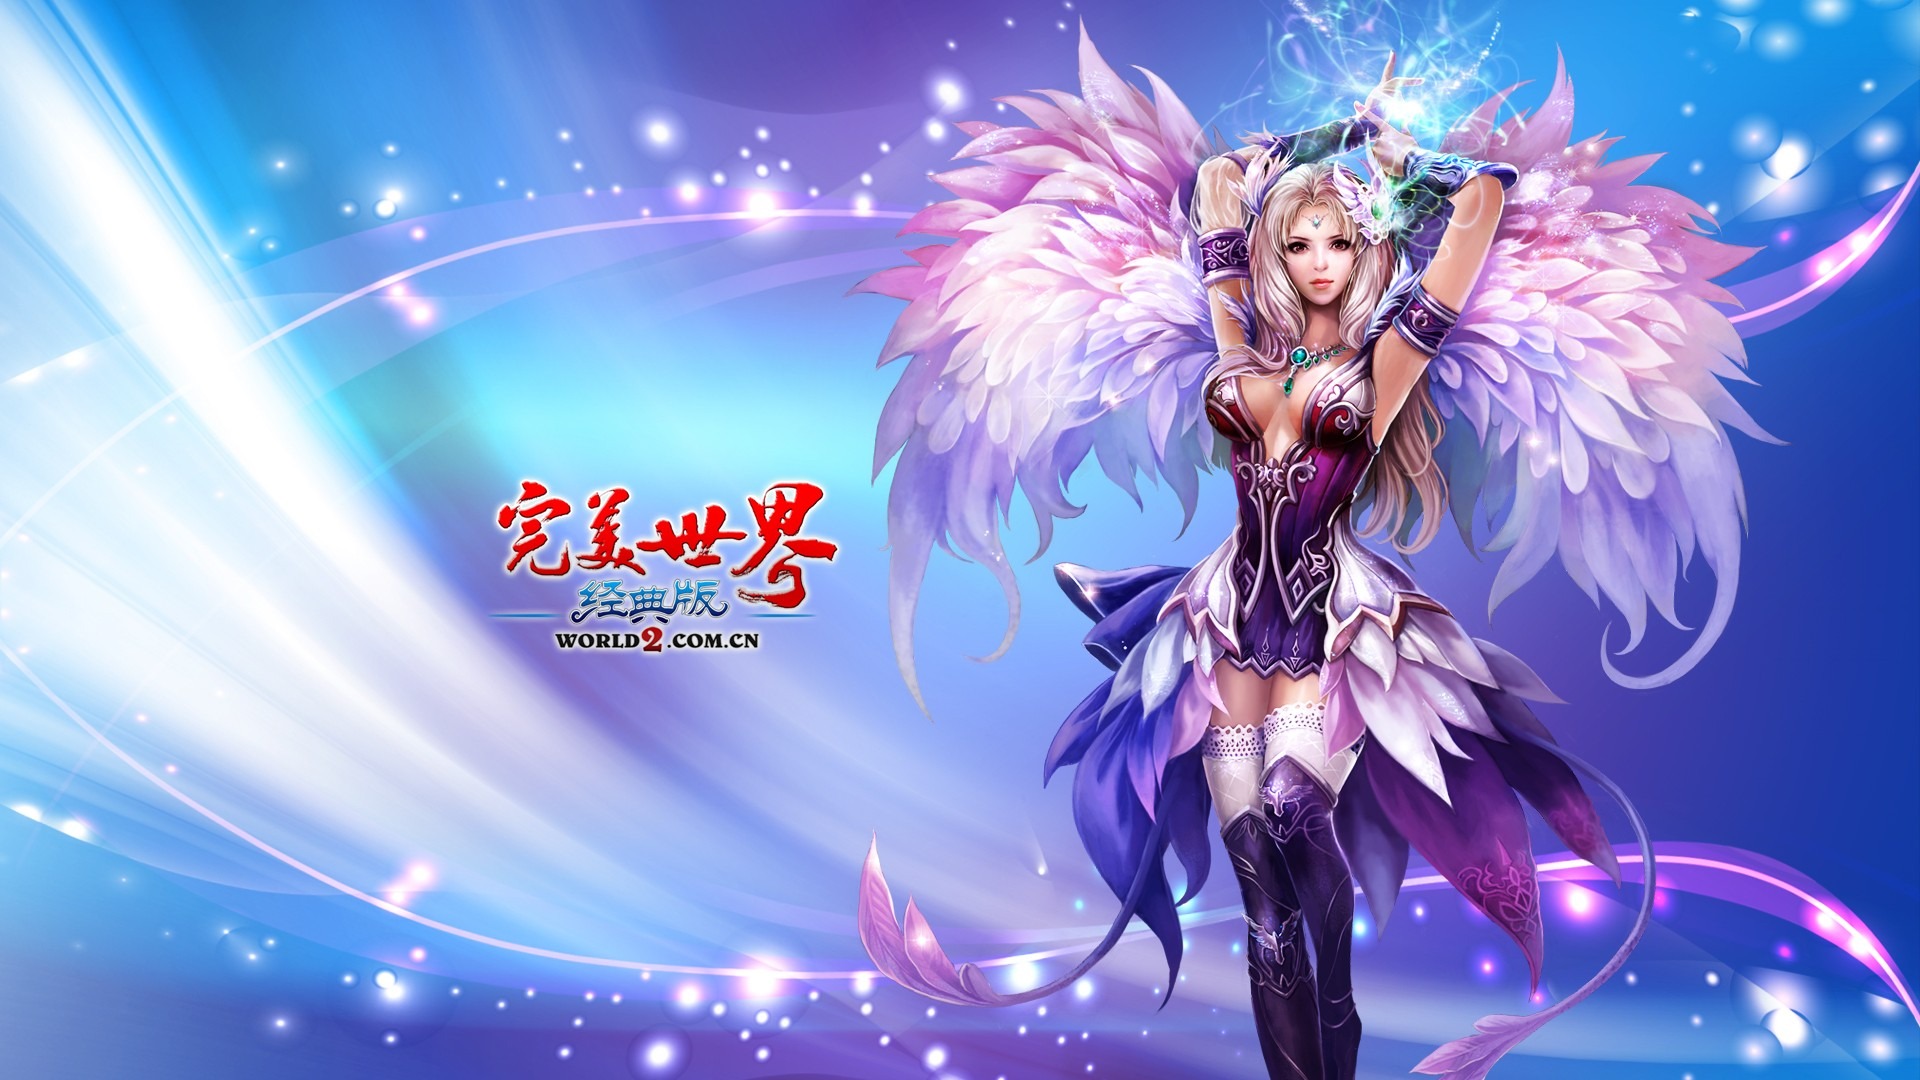 Online game Perfect World Classic HD wallpapers #20 - 1920x1080